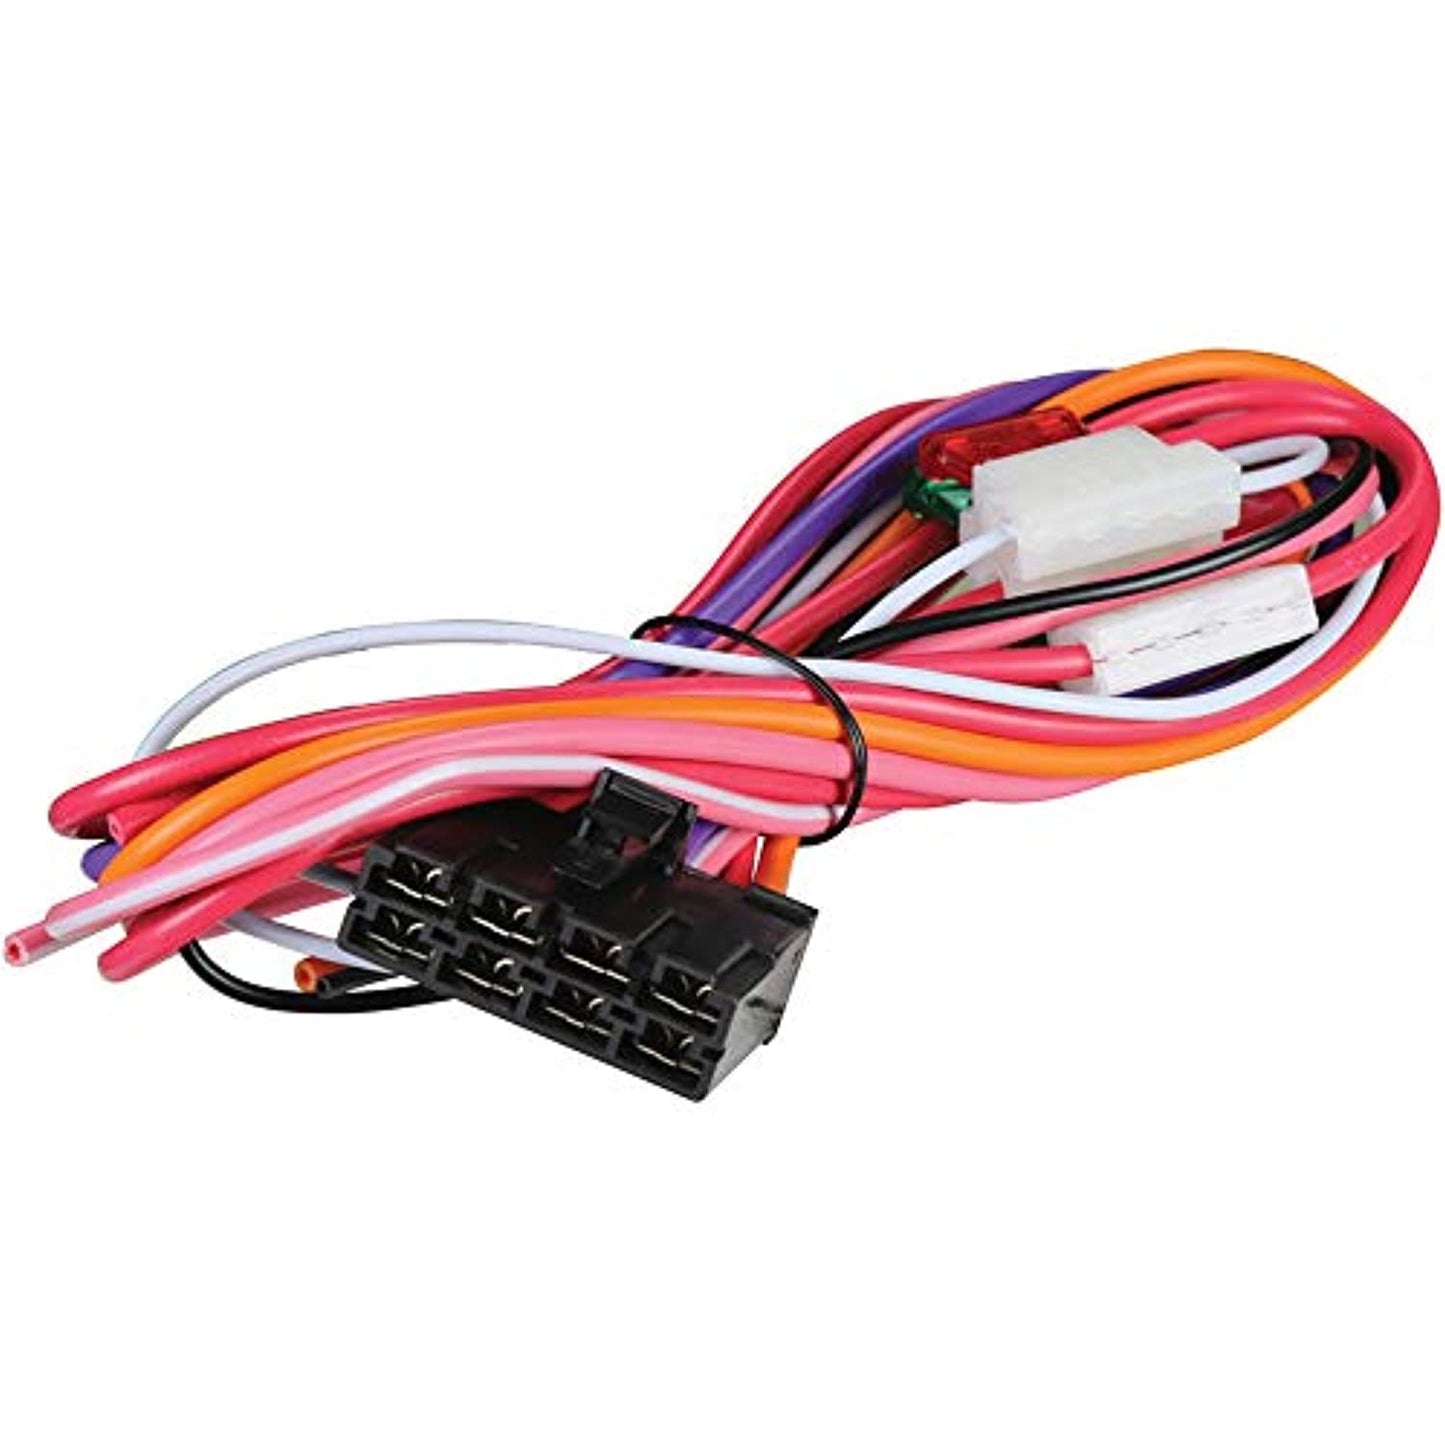 Excalibur Alarms Omegalink High Current Harness for Ol-Rs-Ba Module 7in. x 5in. x 1in.